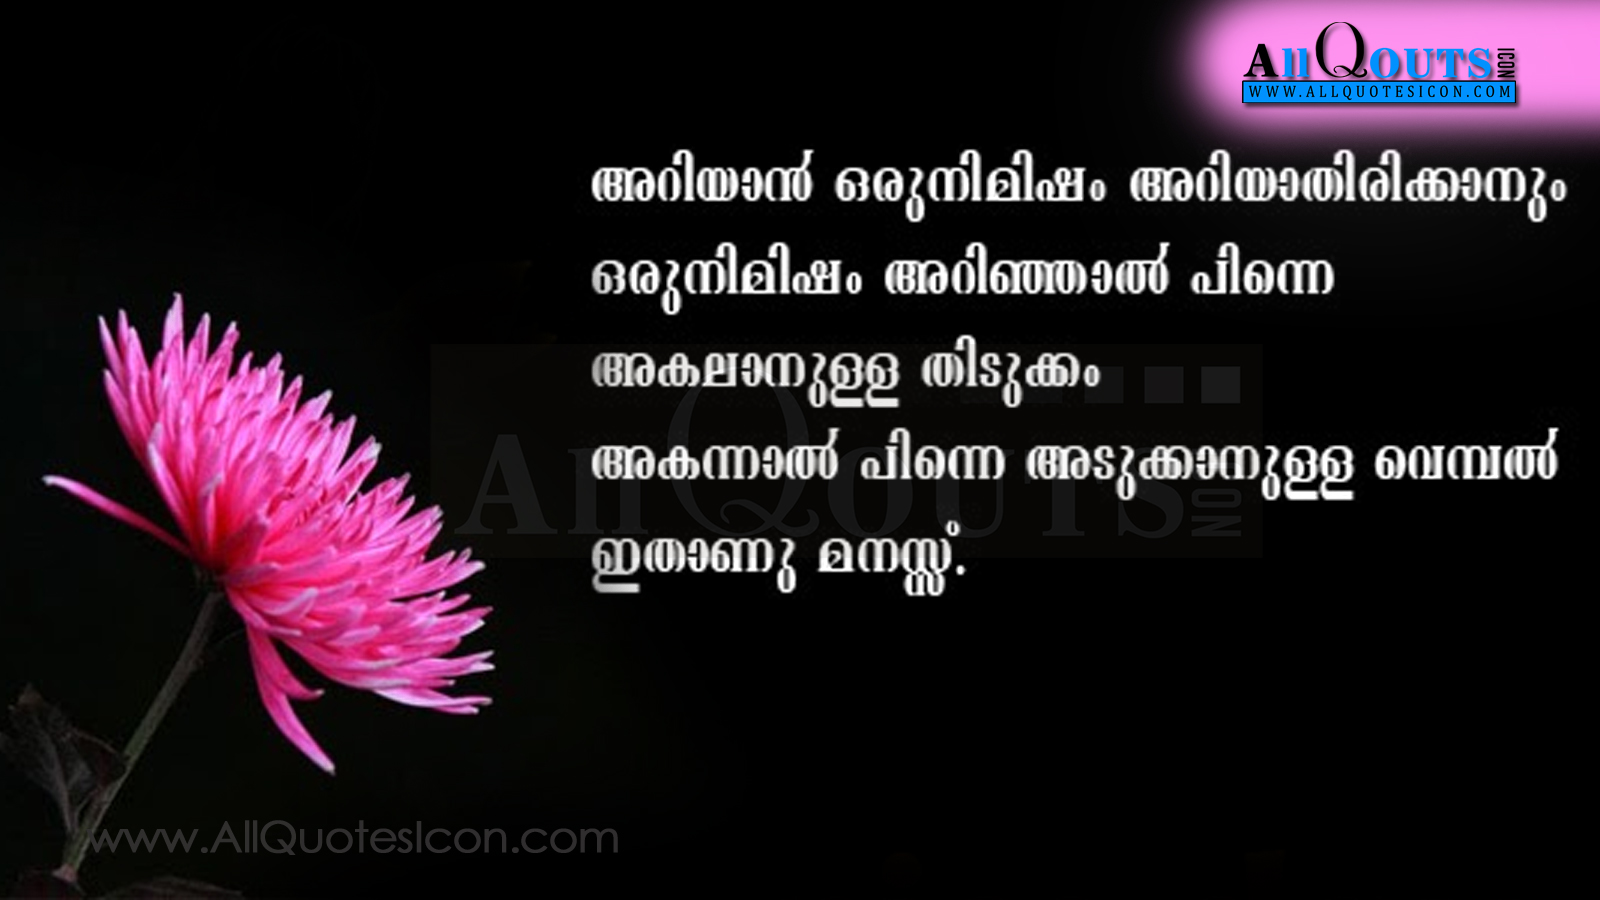 Here is a Malayalam Life Quotes Life Thoughts in Malayalam Best Life Thoughts and